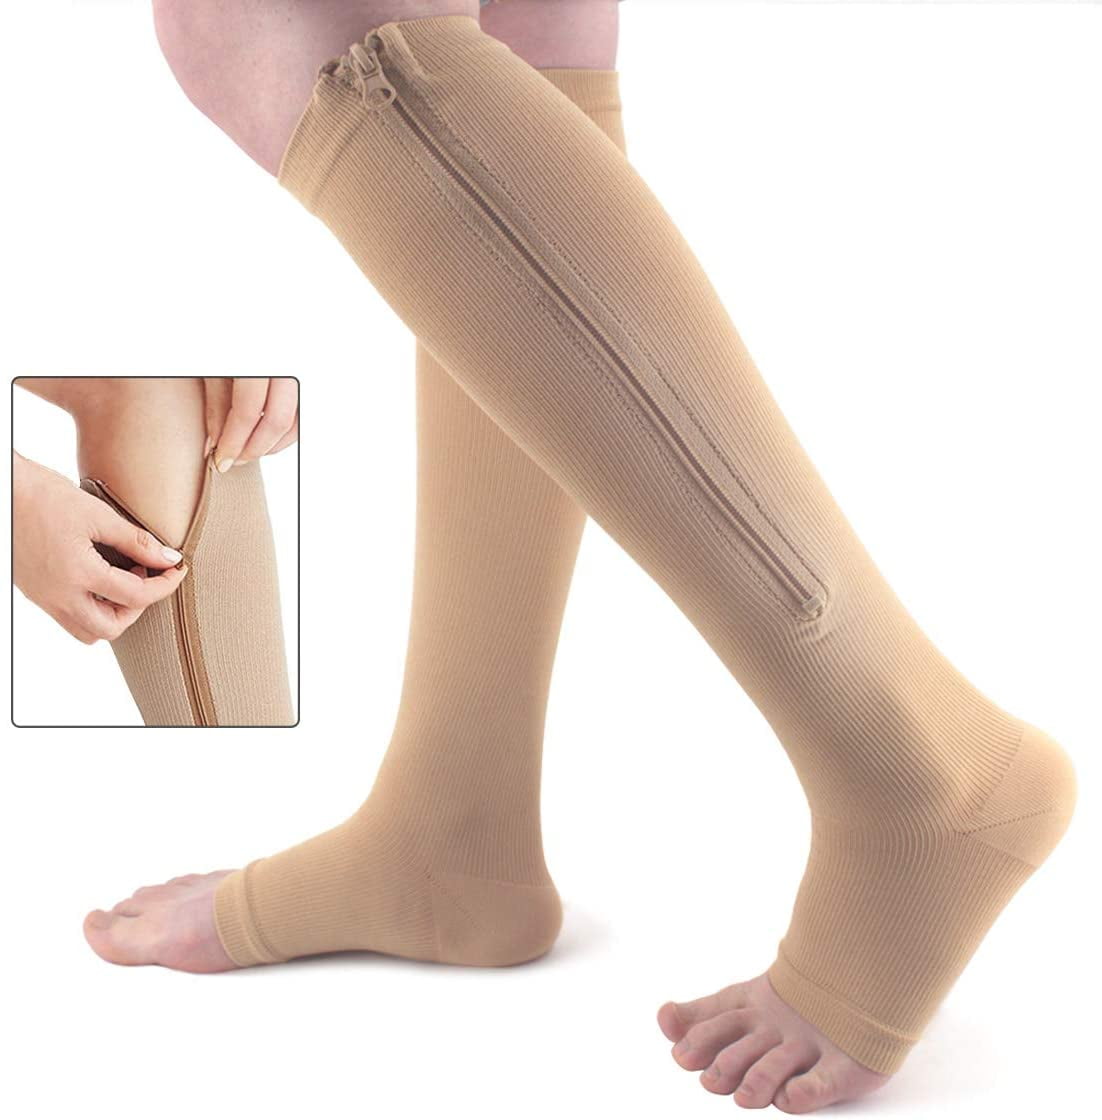 Zippered Compression Socks Medical Grade ? Firm, Easy-On, (15-20 mmHg),  Knee High, Open Toe, Best Stockings for Men and Women - Varicose Veins,  Post Surgery, Edema, Improve Circulation(Beige) 